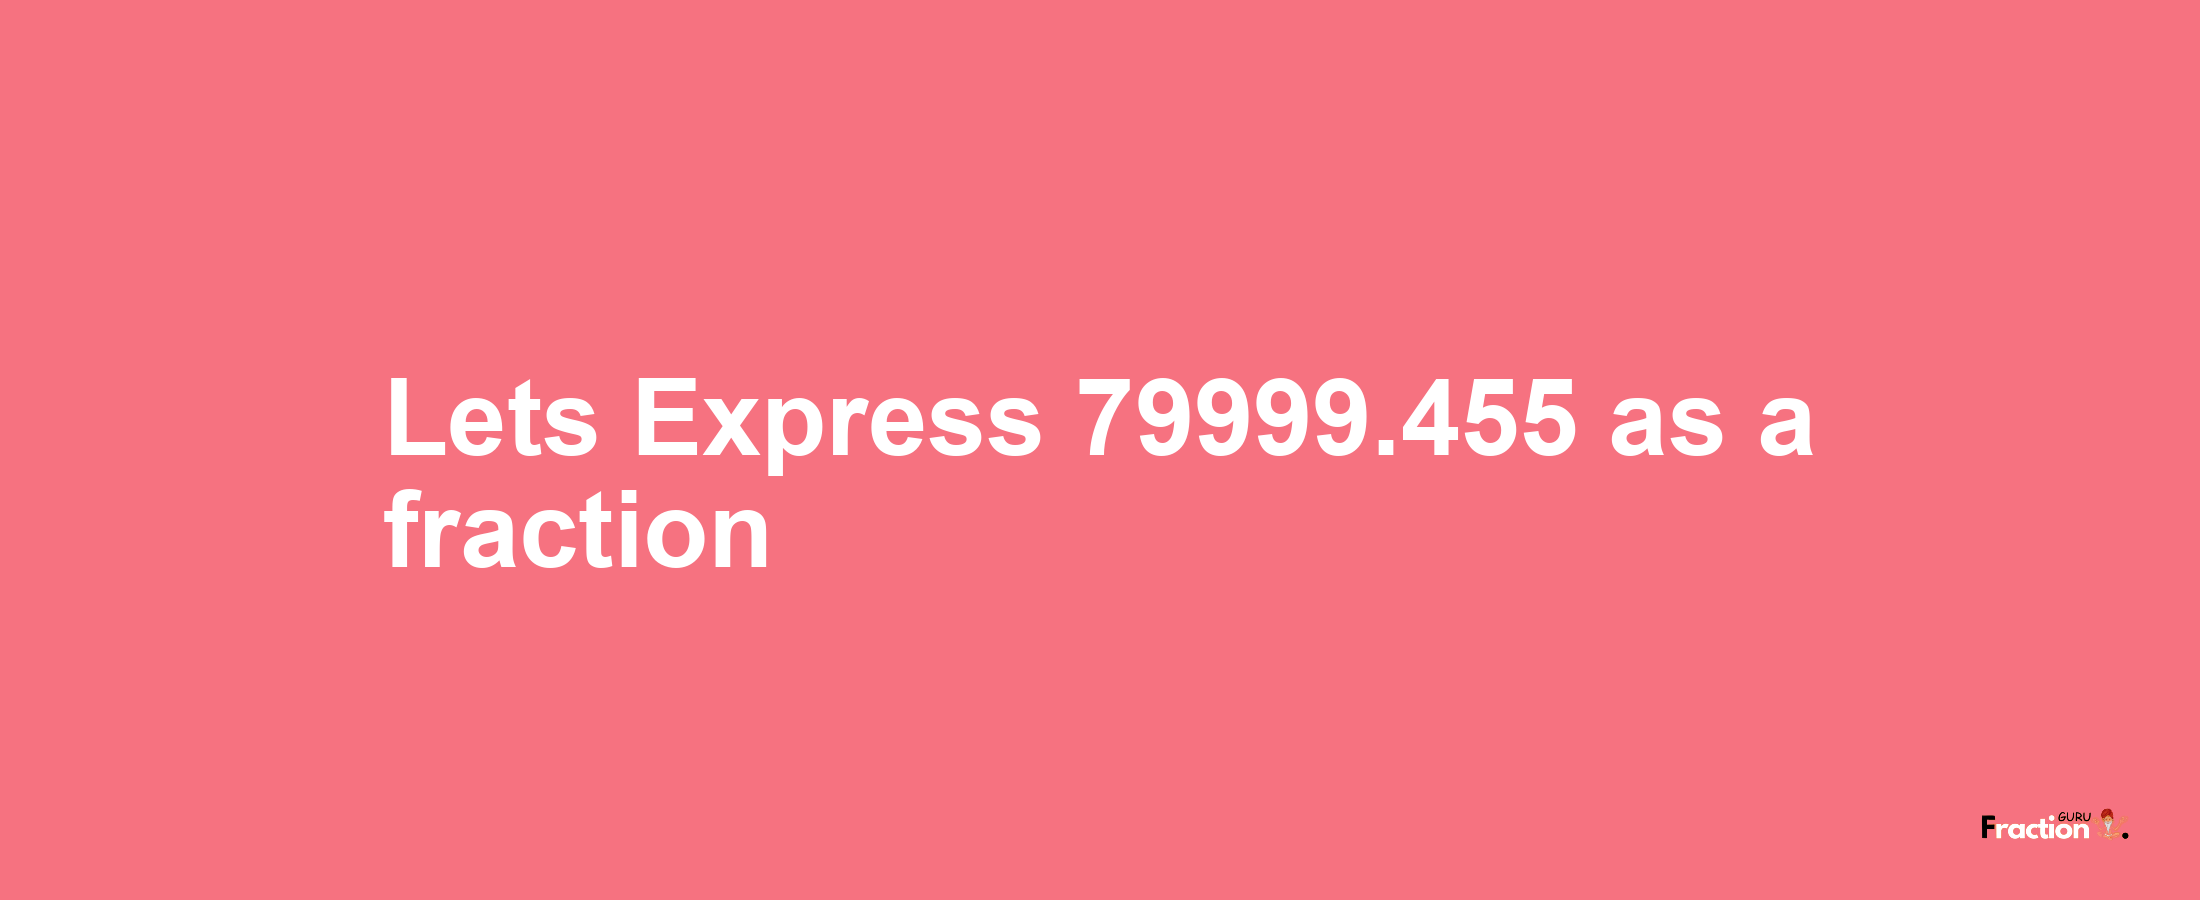 Lets Express 79999.455 as afraction